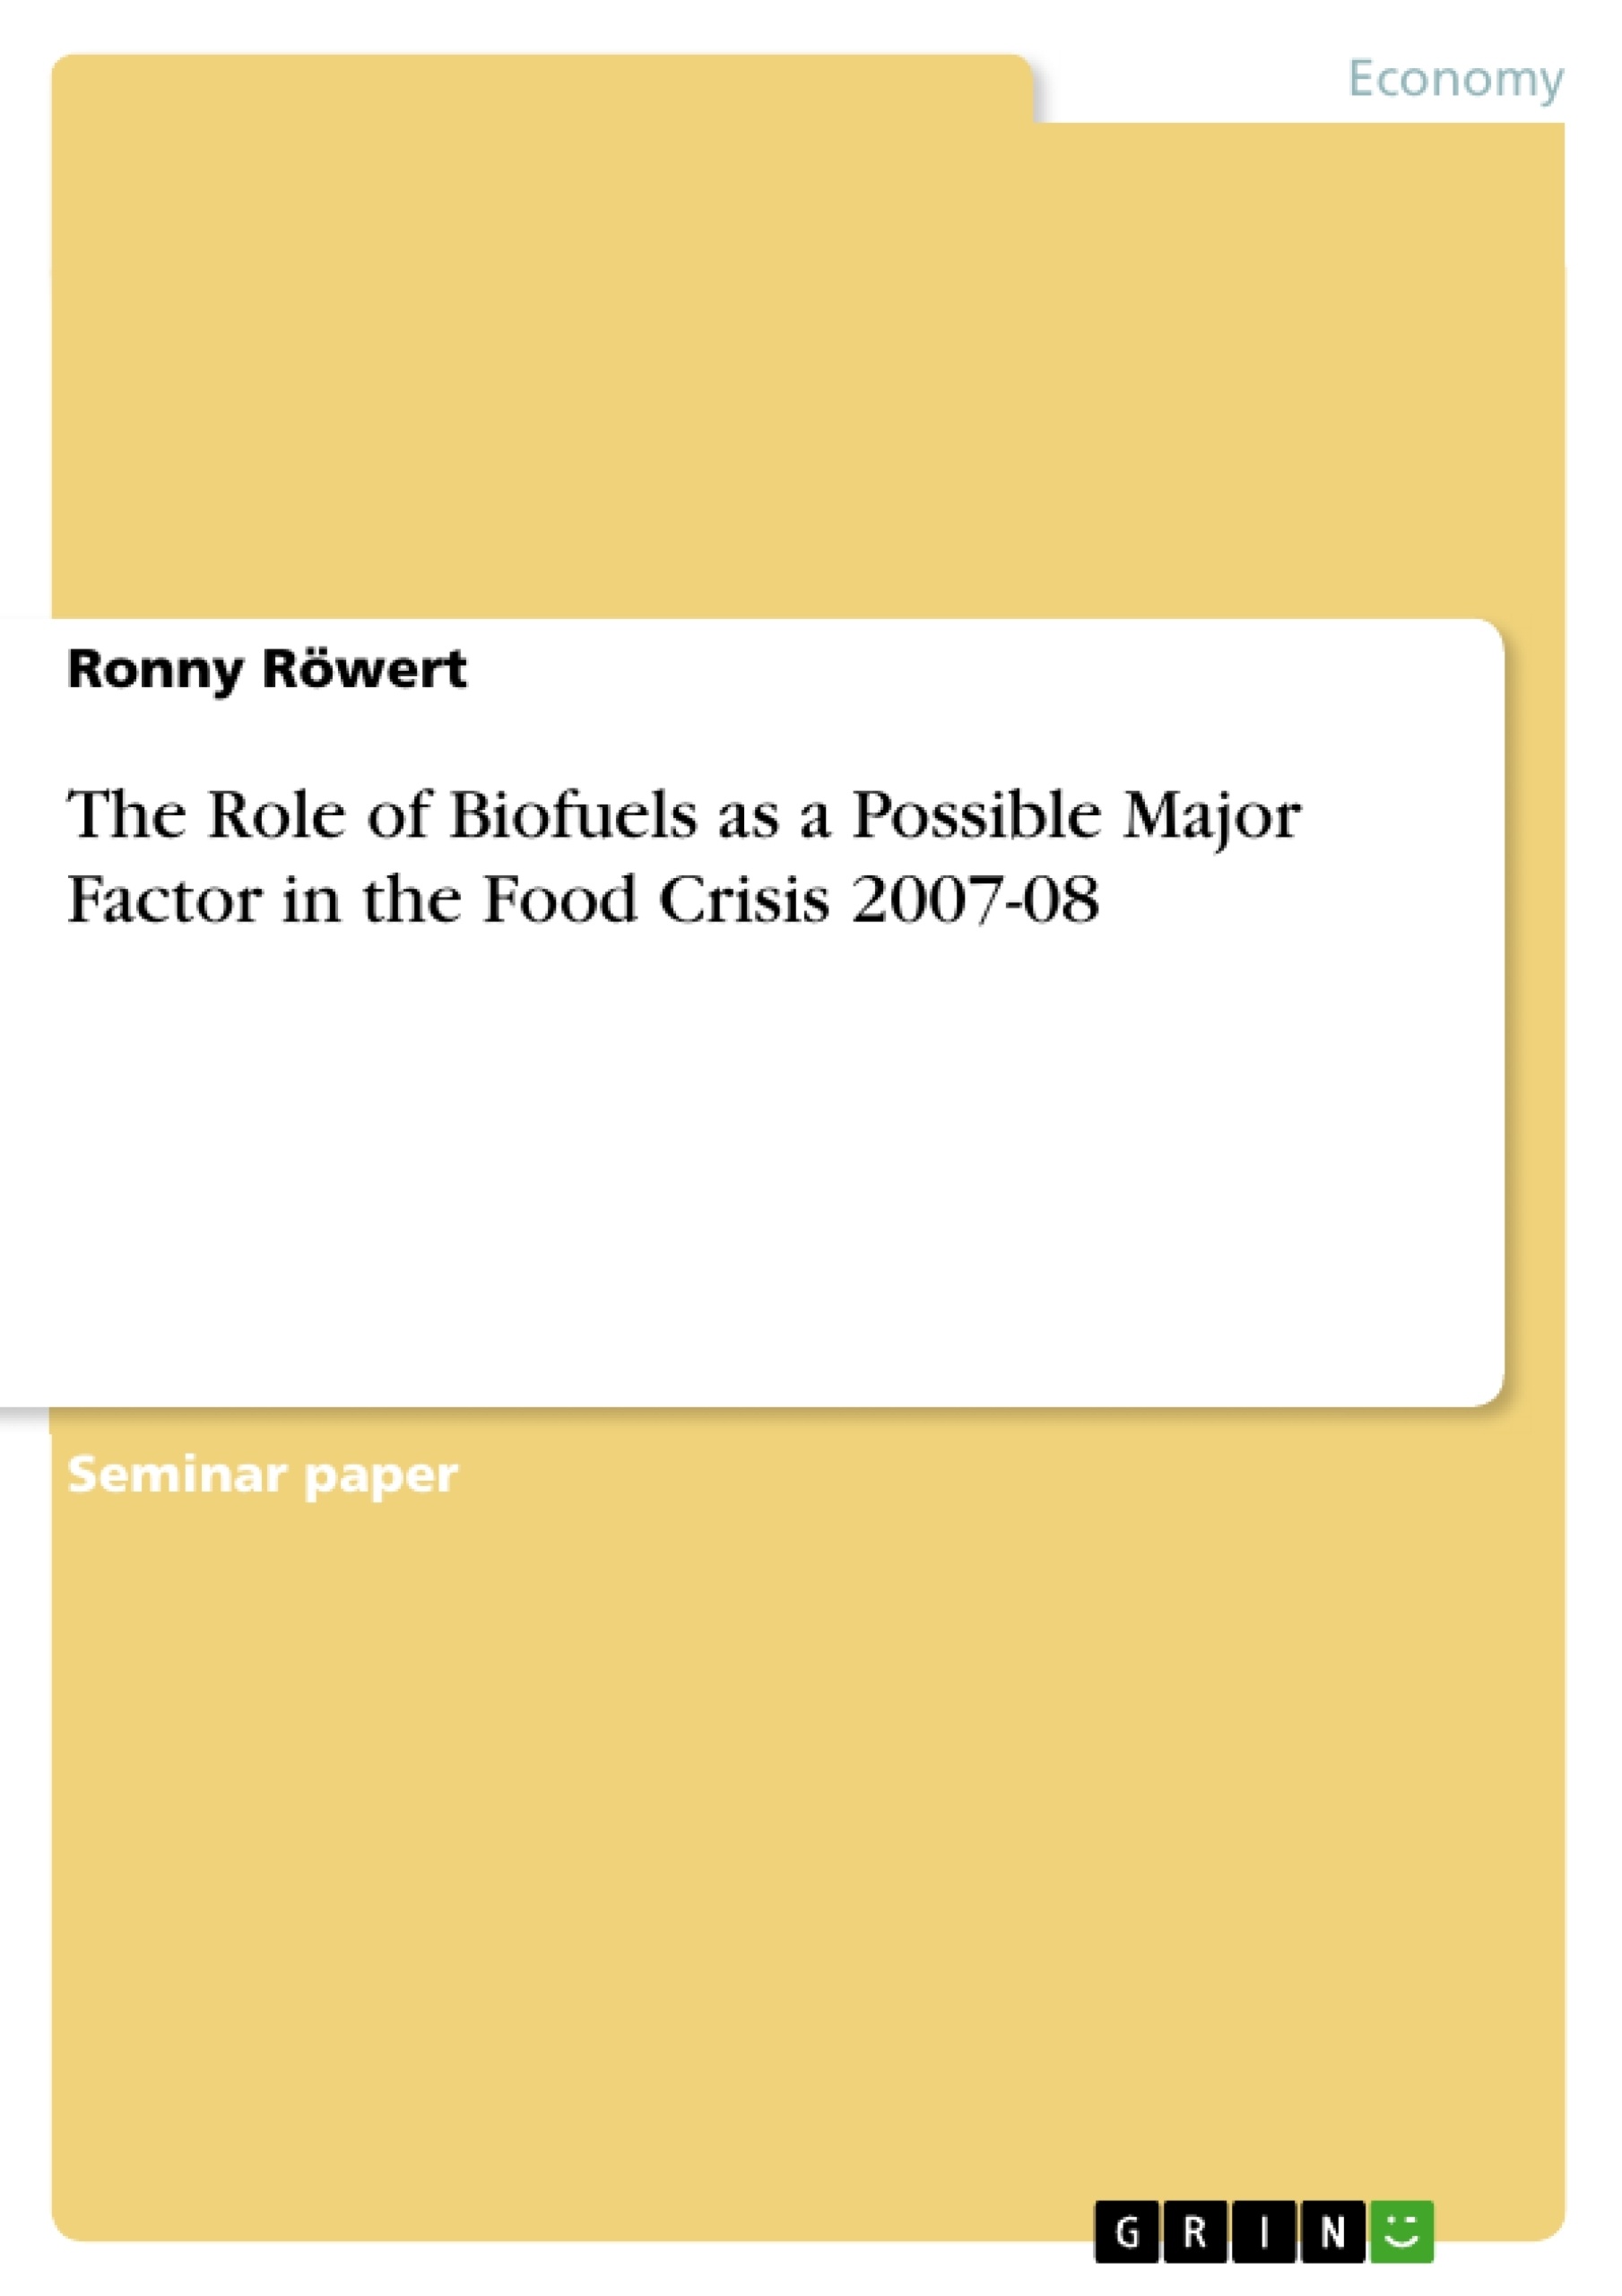 Title: The Role of Biofuels as a Possible Major Factor in the Food Crisis 2007-08